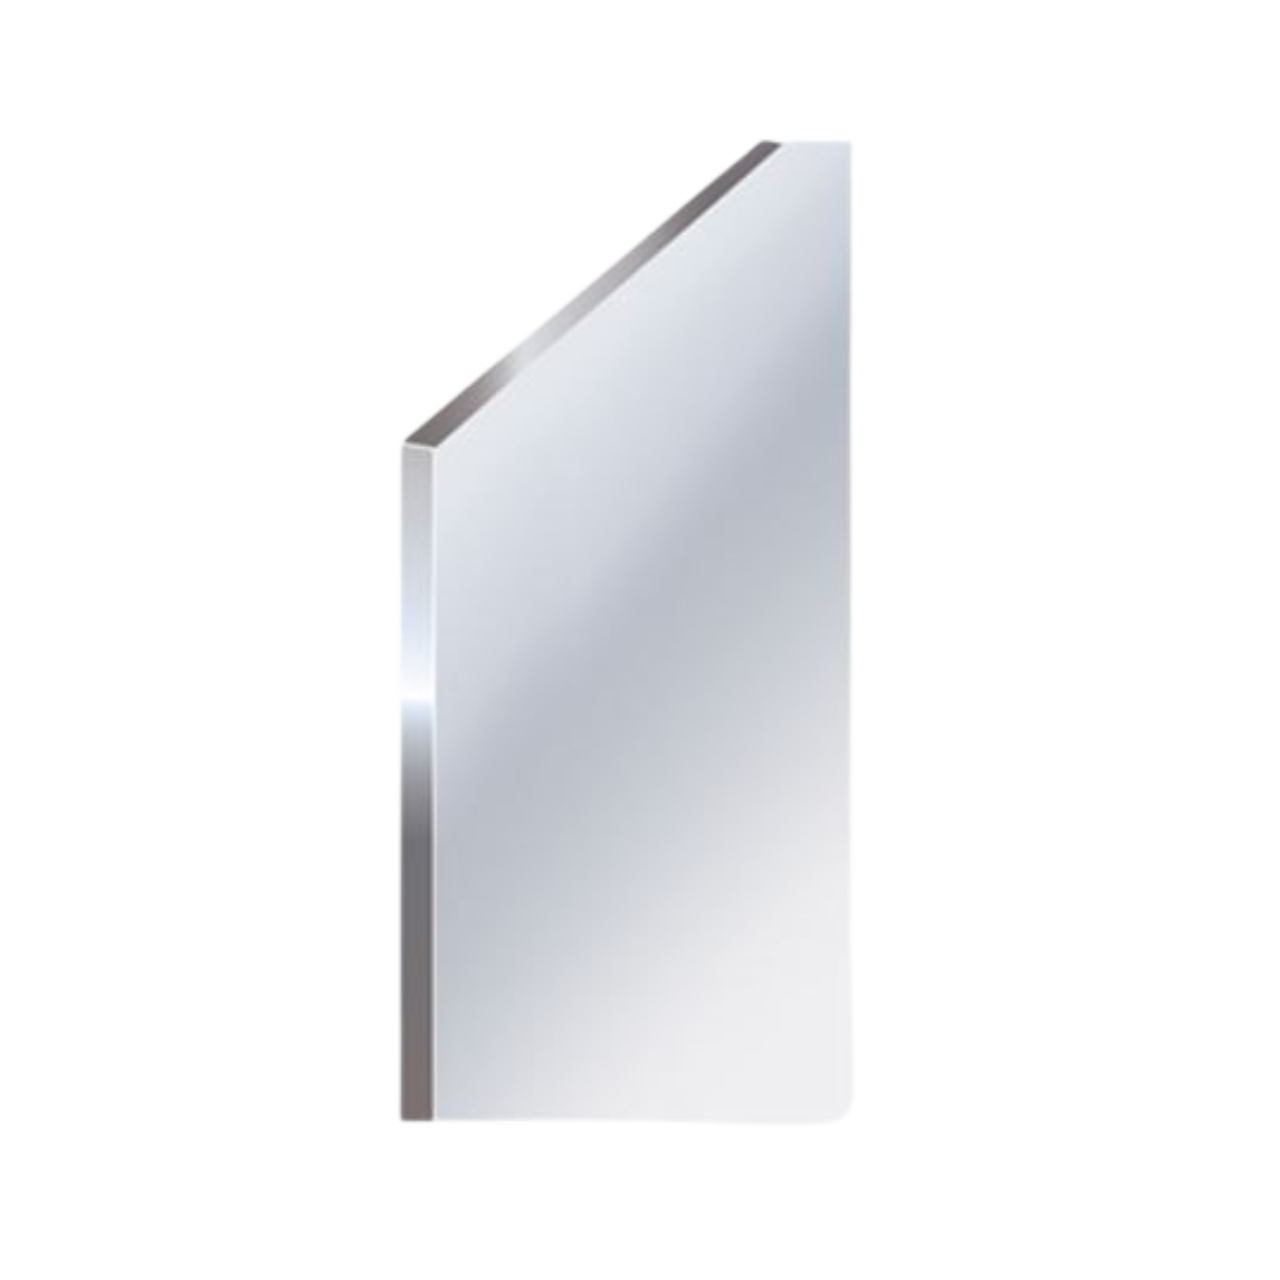 Frameless Stainless Steel Mirrors, 304 Stainless Steel, 20 Gauge, 24x36,  AS-8026-2436 - Cleanroom World